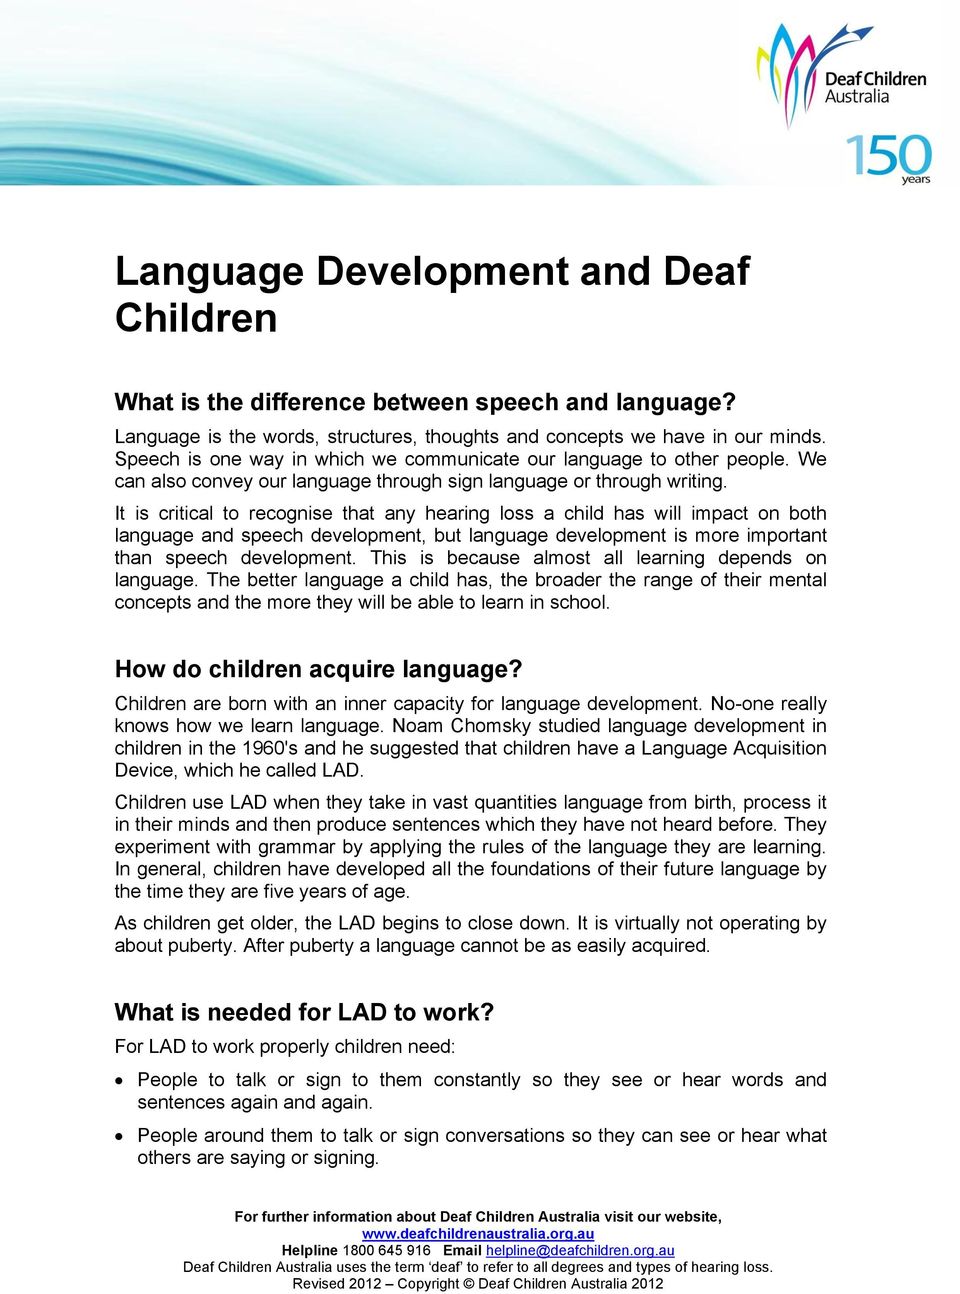 It is critical to recognise that any hearing loss a child has will impact on both language and speech development, but language development is more important than speech development.